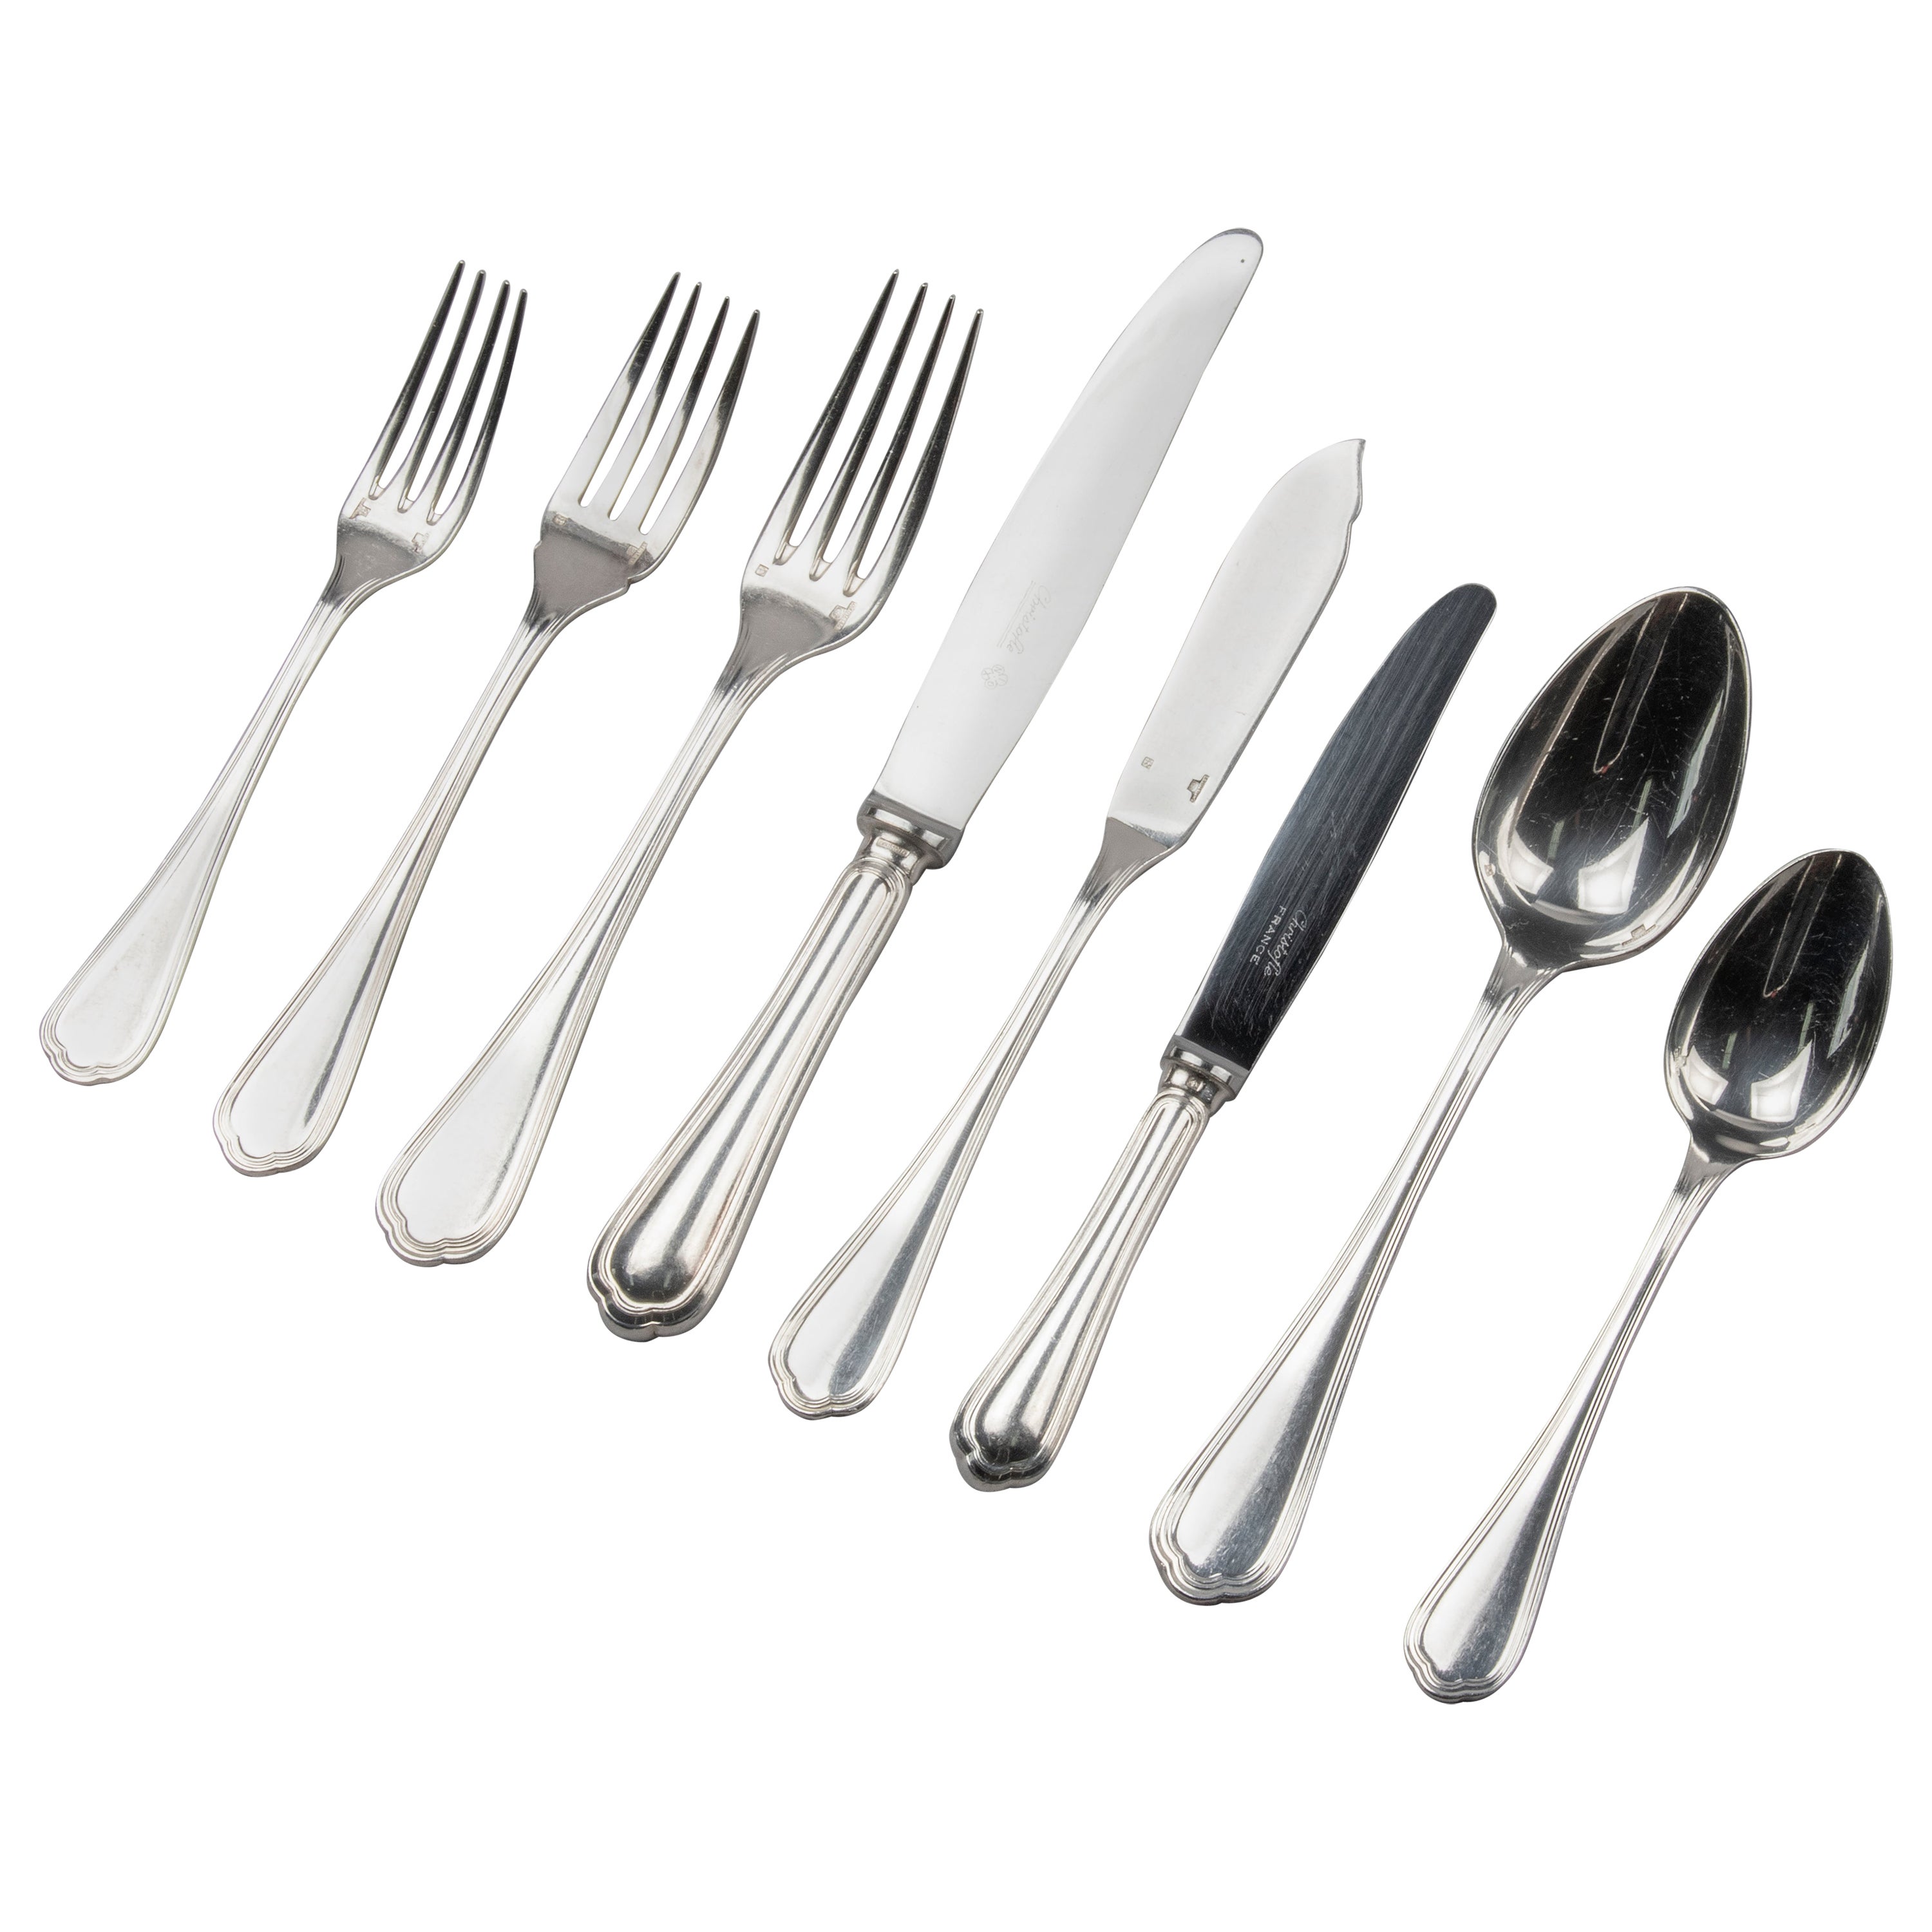 96-Piece Set of Silver Plated Flatware by Christofle Model Spatours